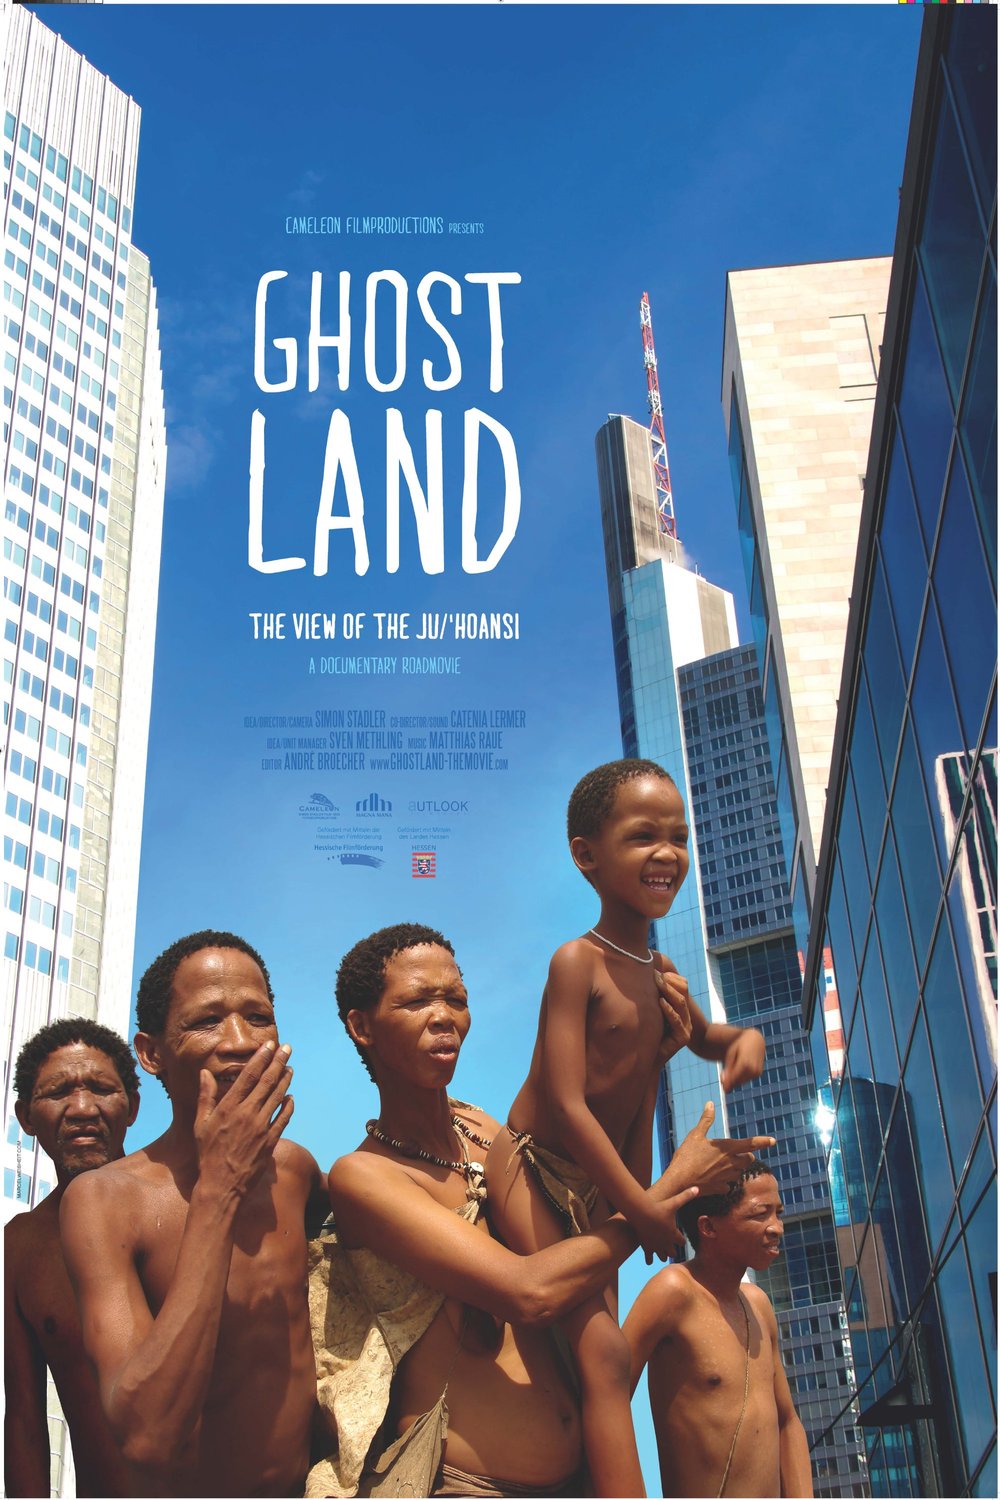 Poster of the movie Ghostland: The View of the Ju'Hoansi